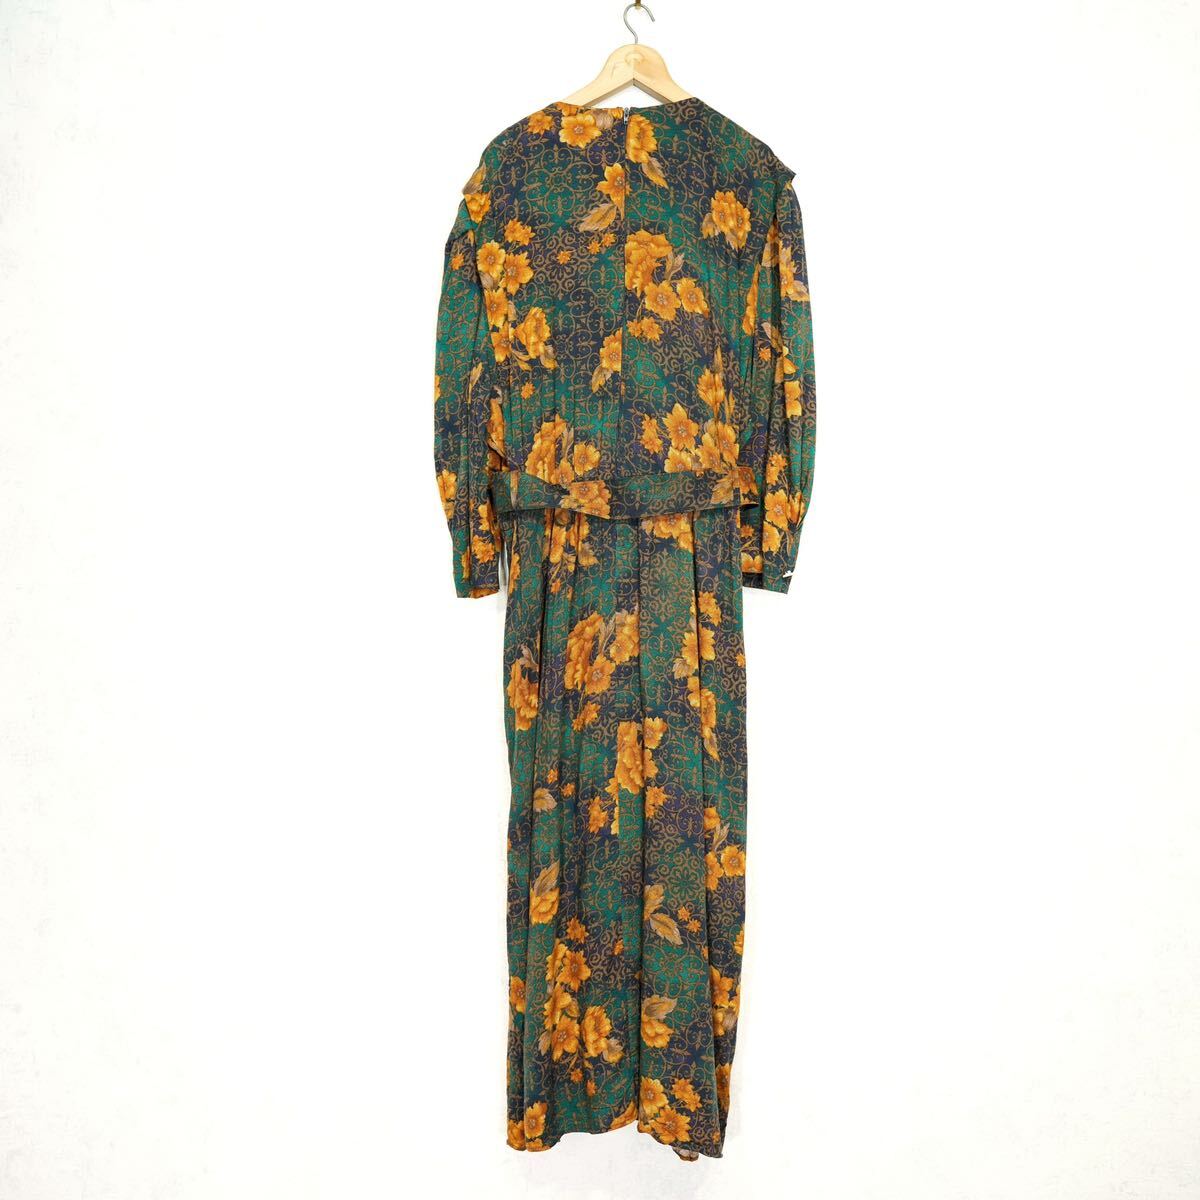 USA VINTAGE SBL DESIGNS LACE COLLAR FLOWER PATTERNED DESIGN BELTED ONE PIECE/アメリカ古着レース襟花柄デザインベルテッドワンピース